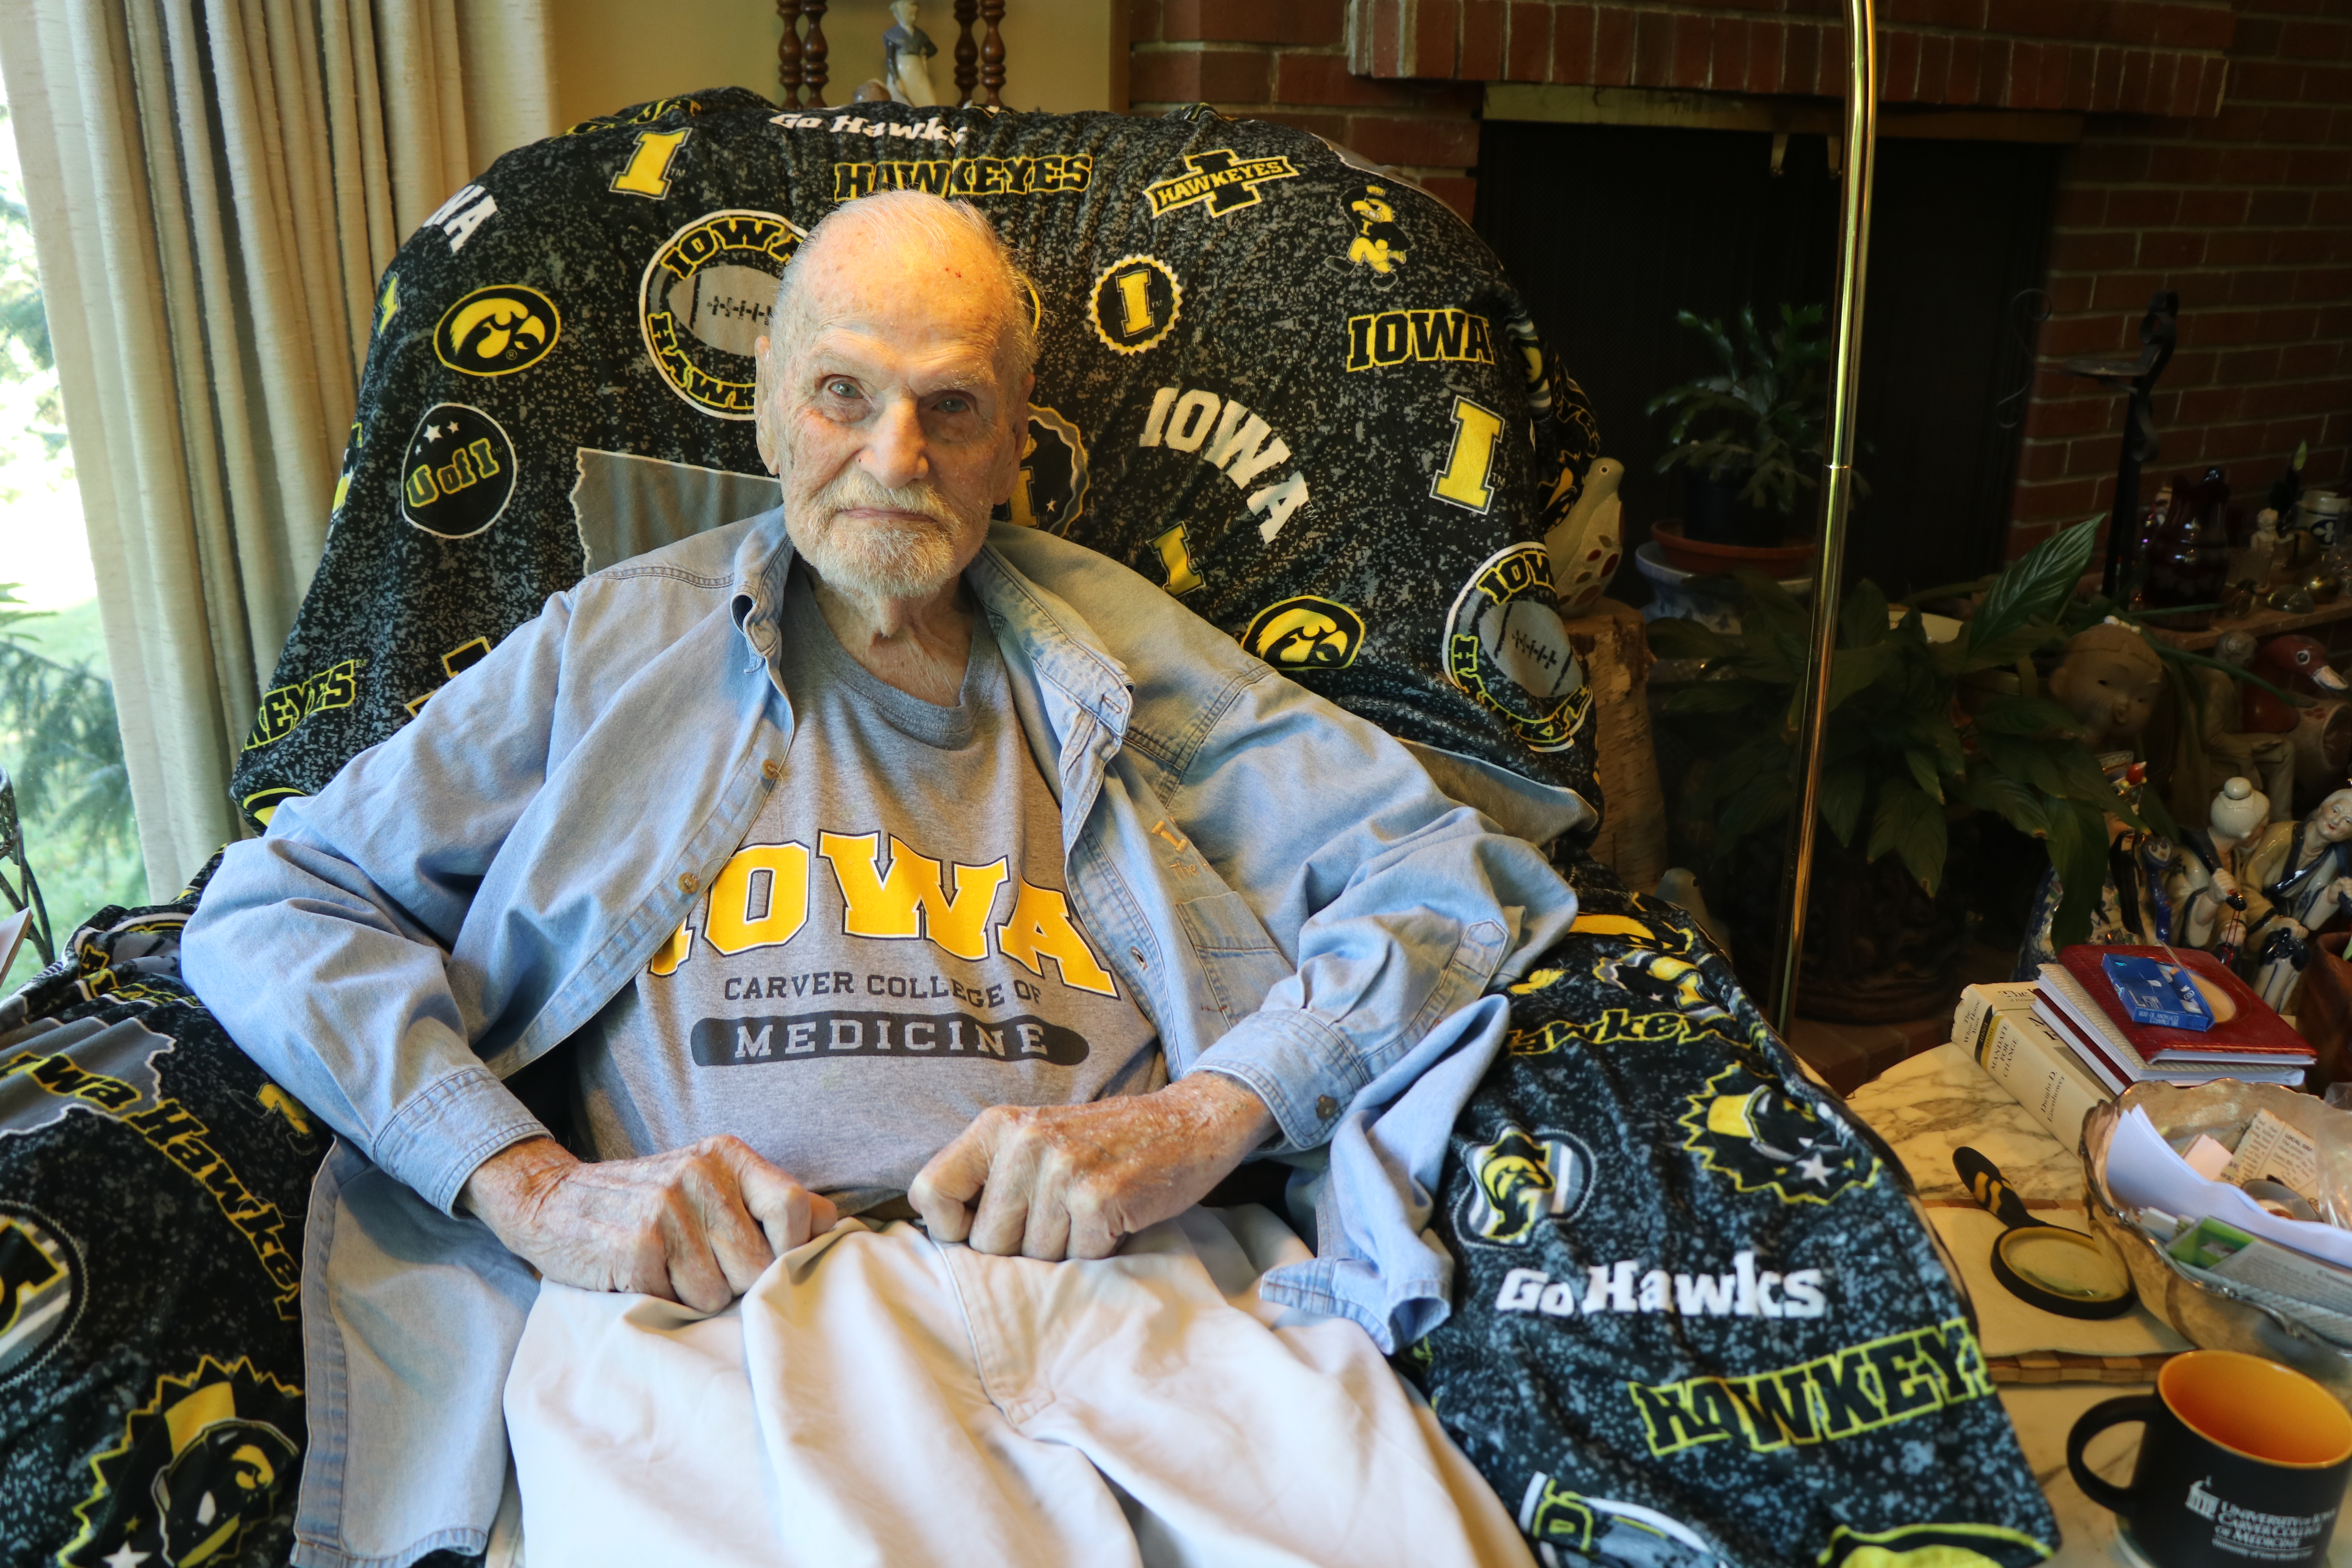 Portrait of Rufus Kruse, MD sitting in an armchair at home, wearing a Carver College of Medicine t-shirt